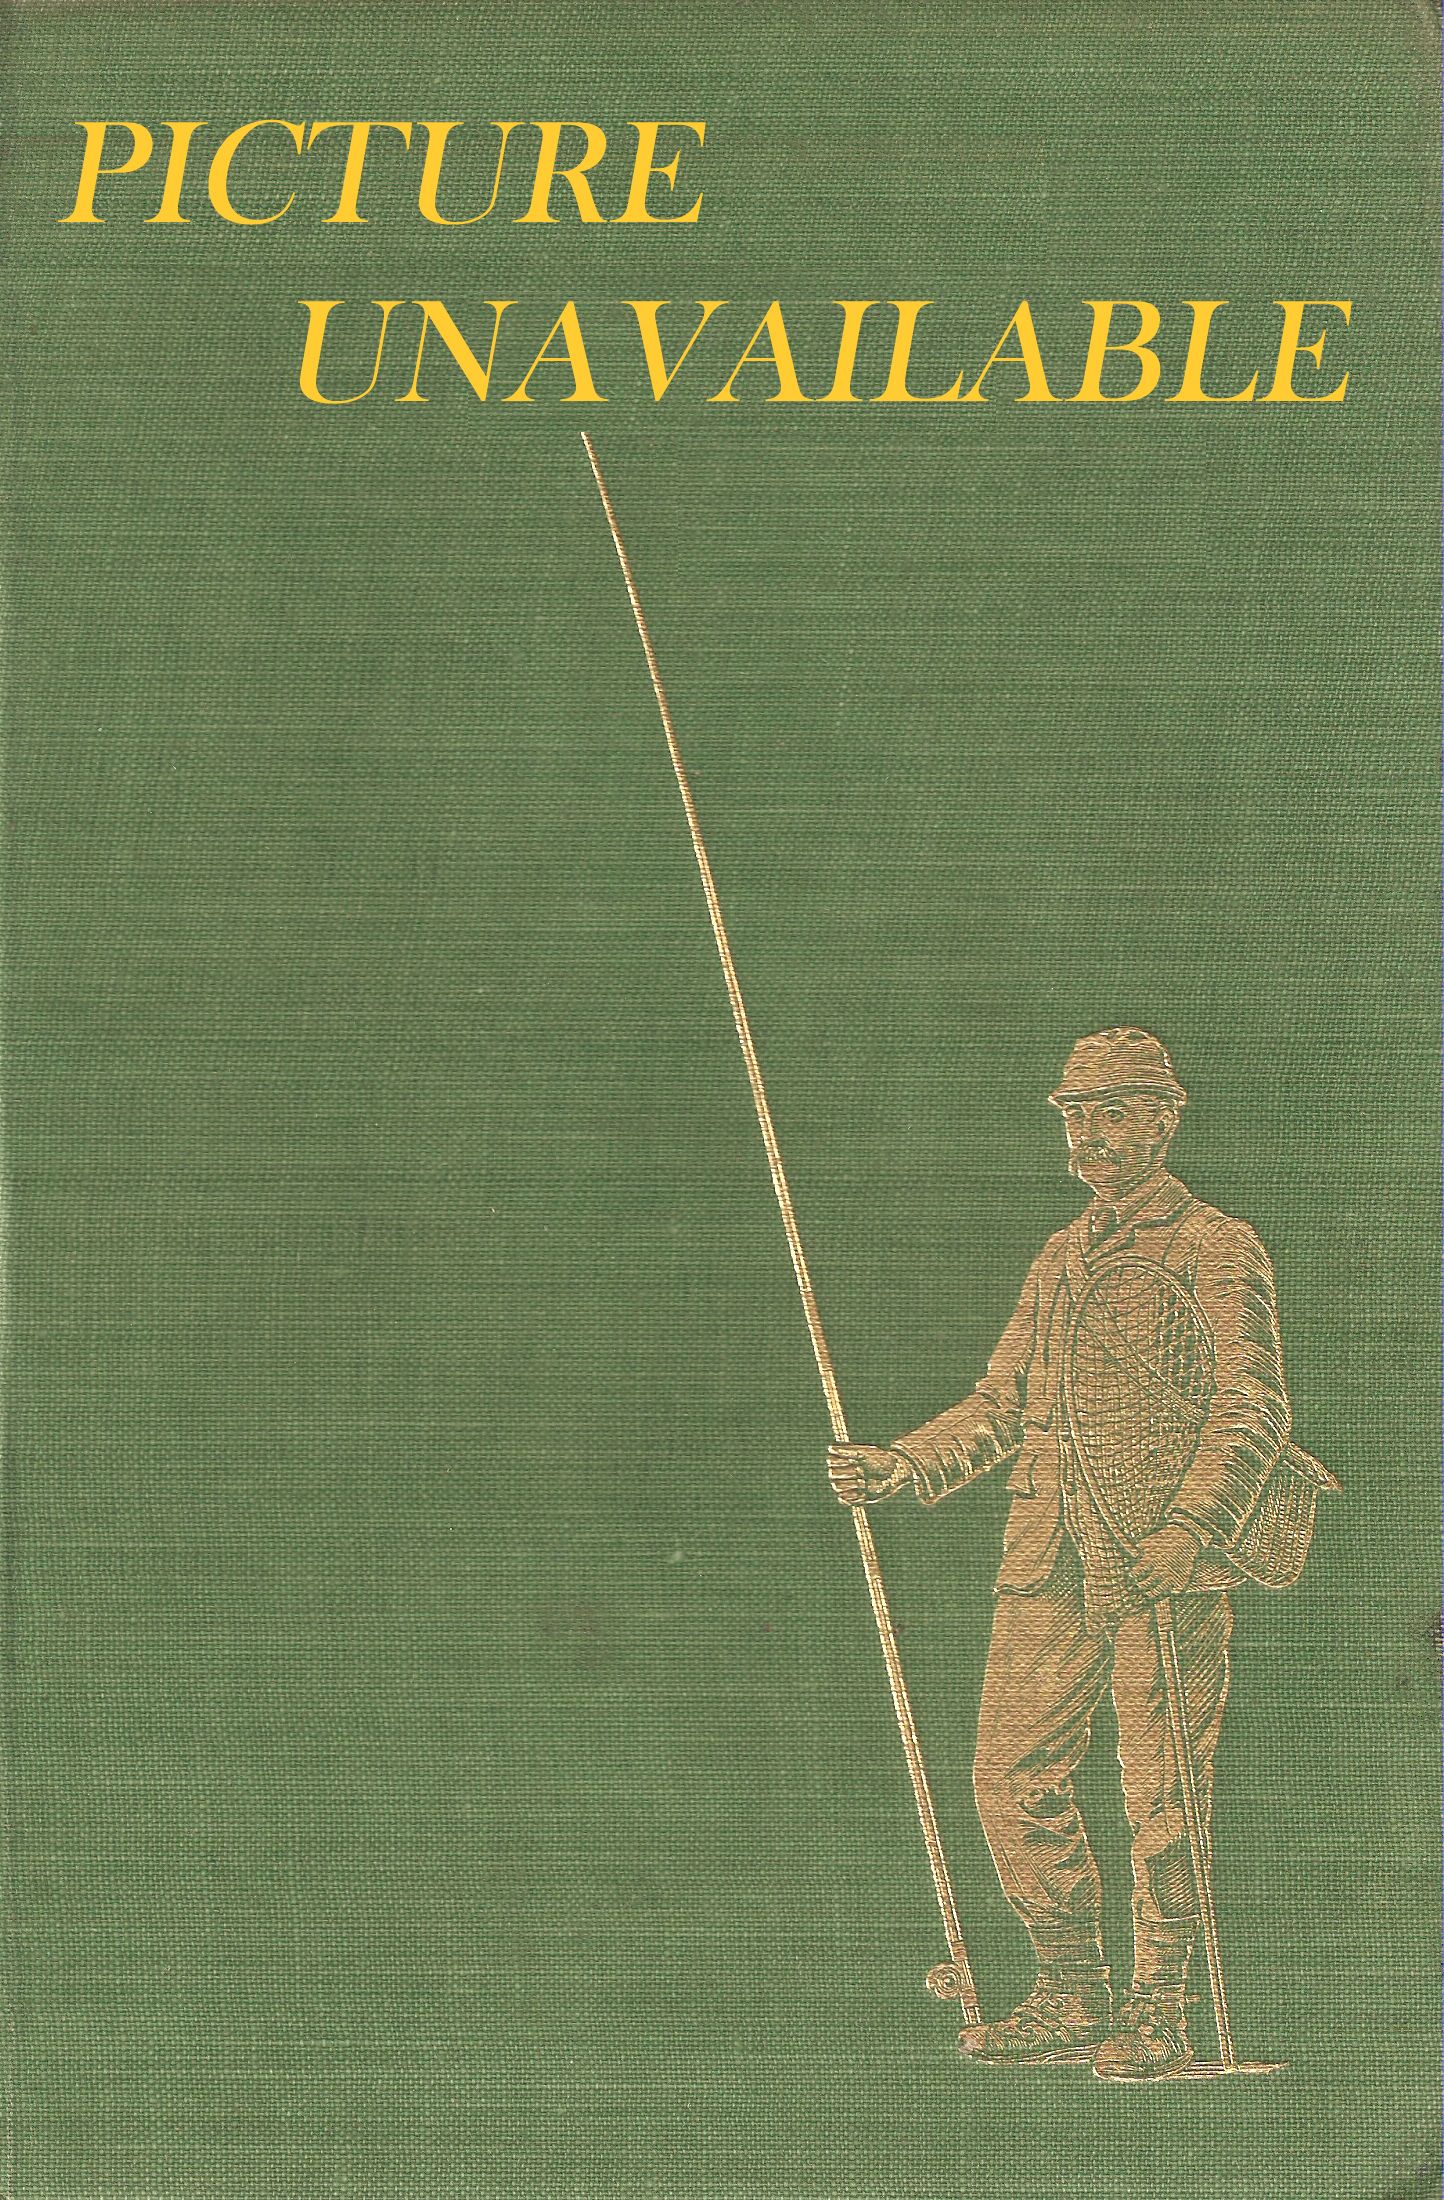 THE PRACTICAL ANGLER: together with A CAUTION TO ANGLERS. By W.C. Stewart.